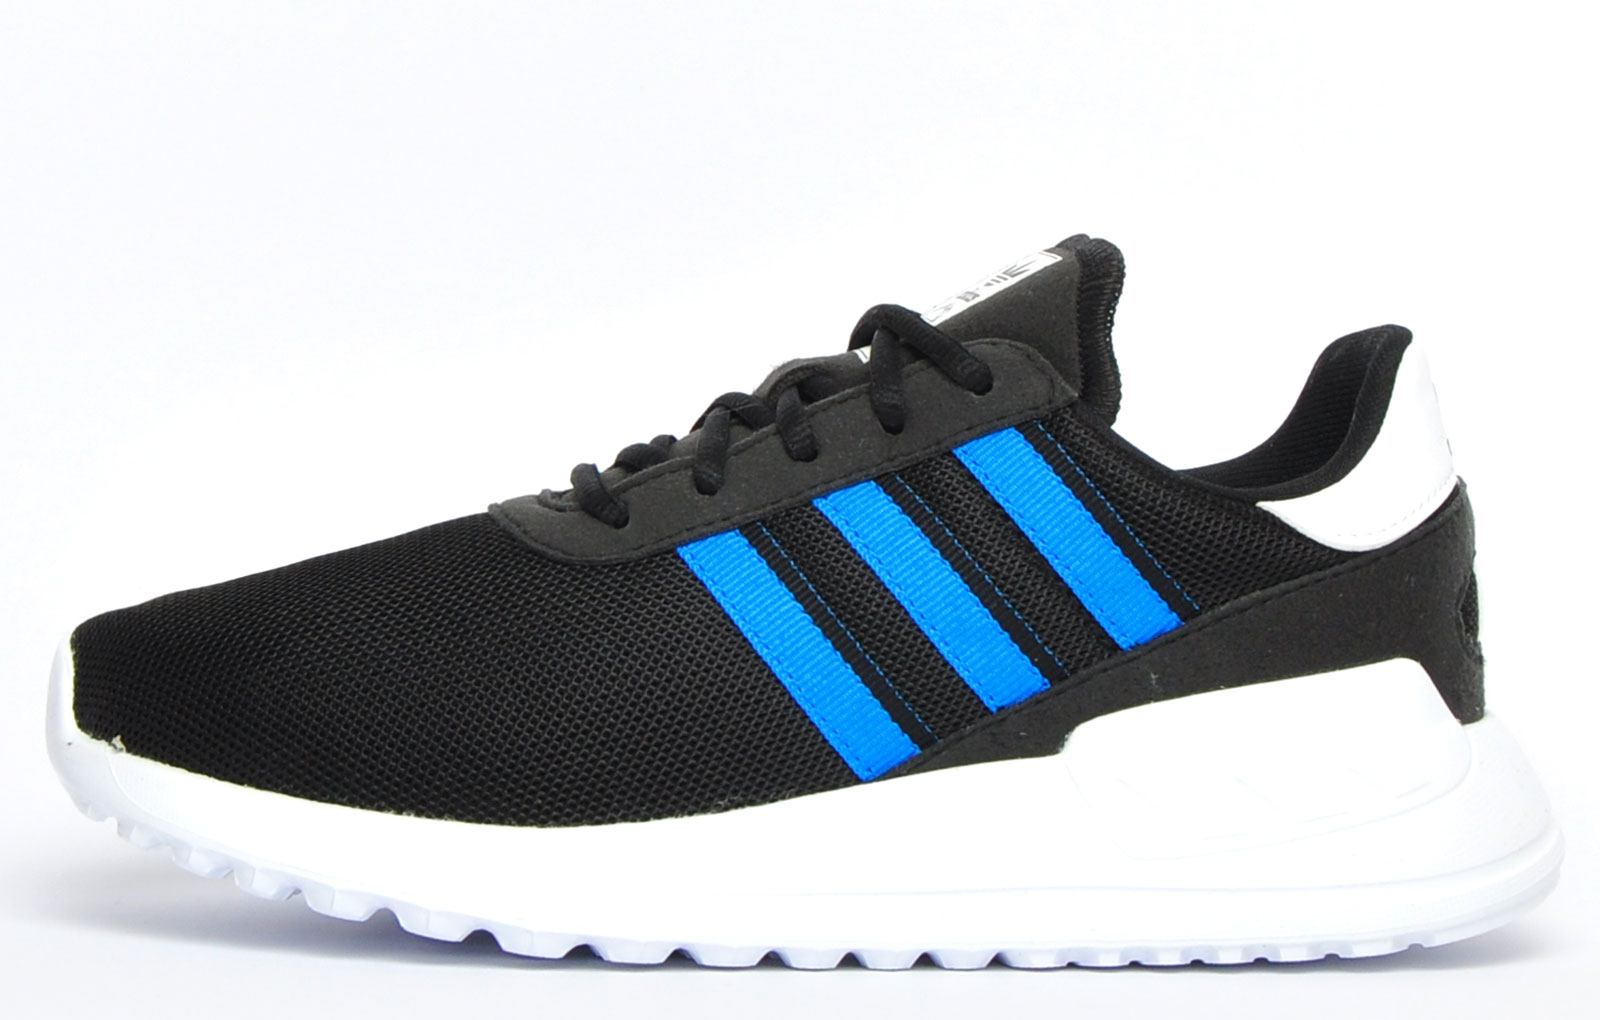 Kids' Adidas Trainers Sale | Kids' Shoes Express Trainers